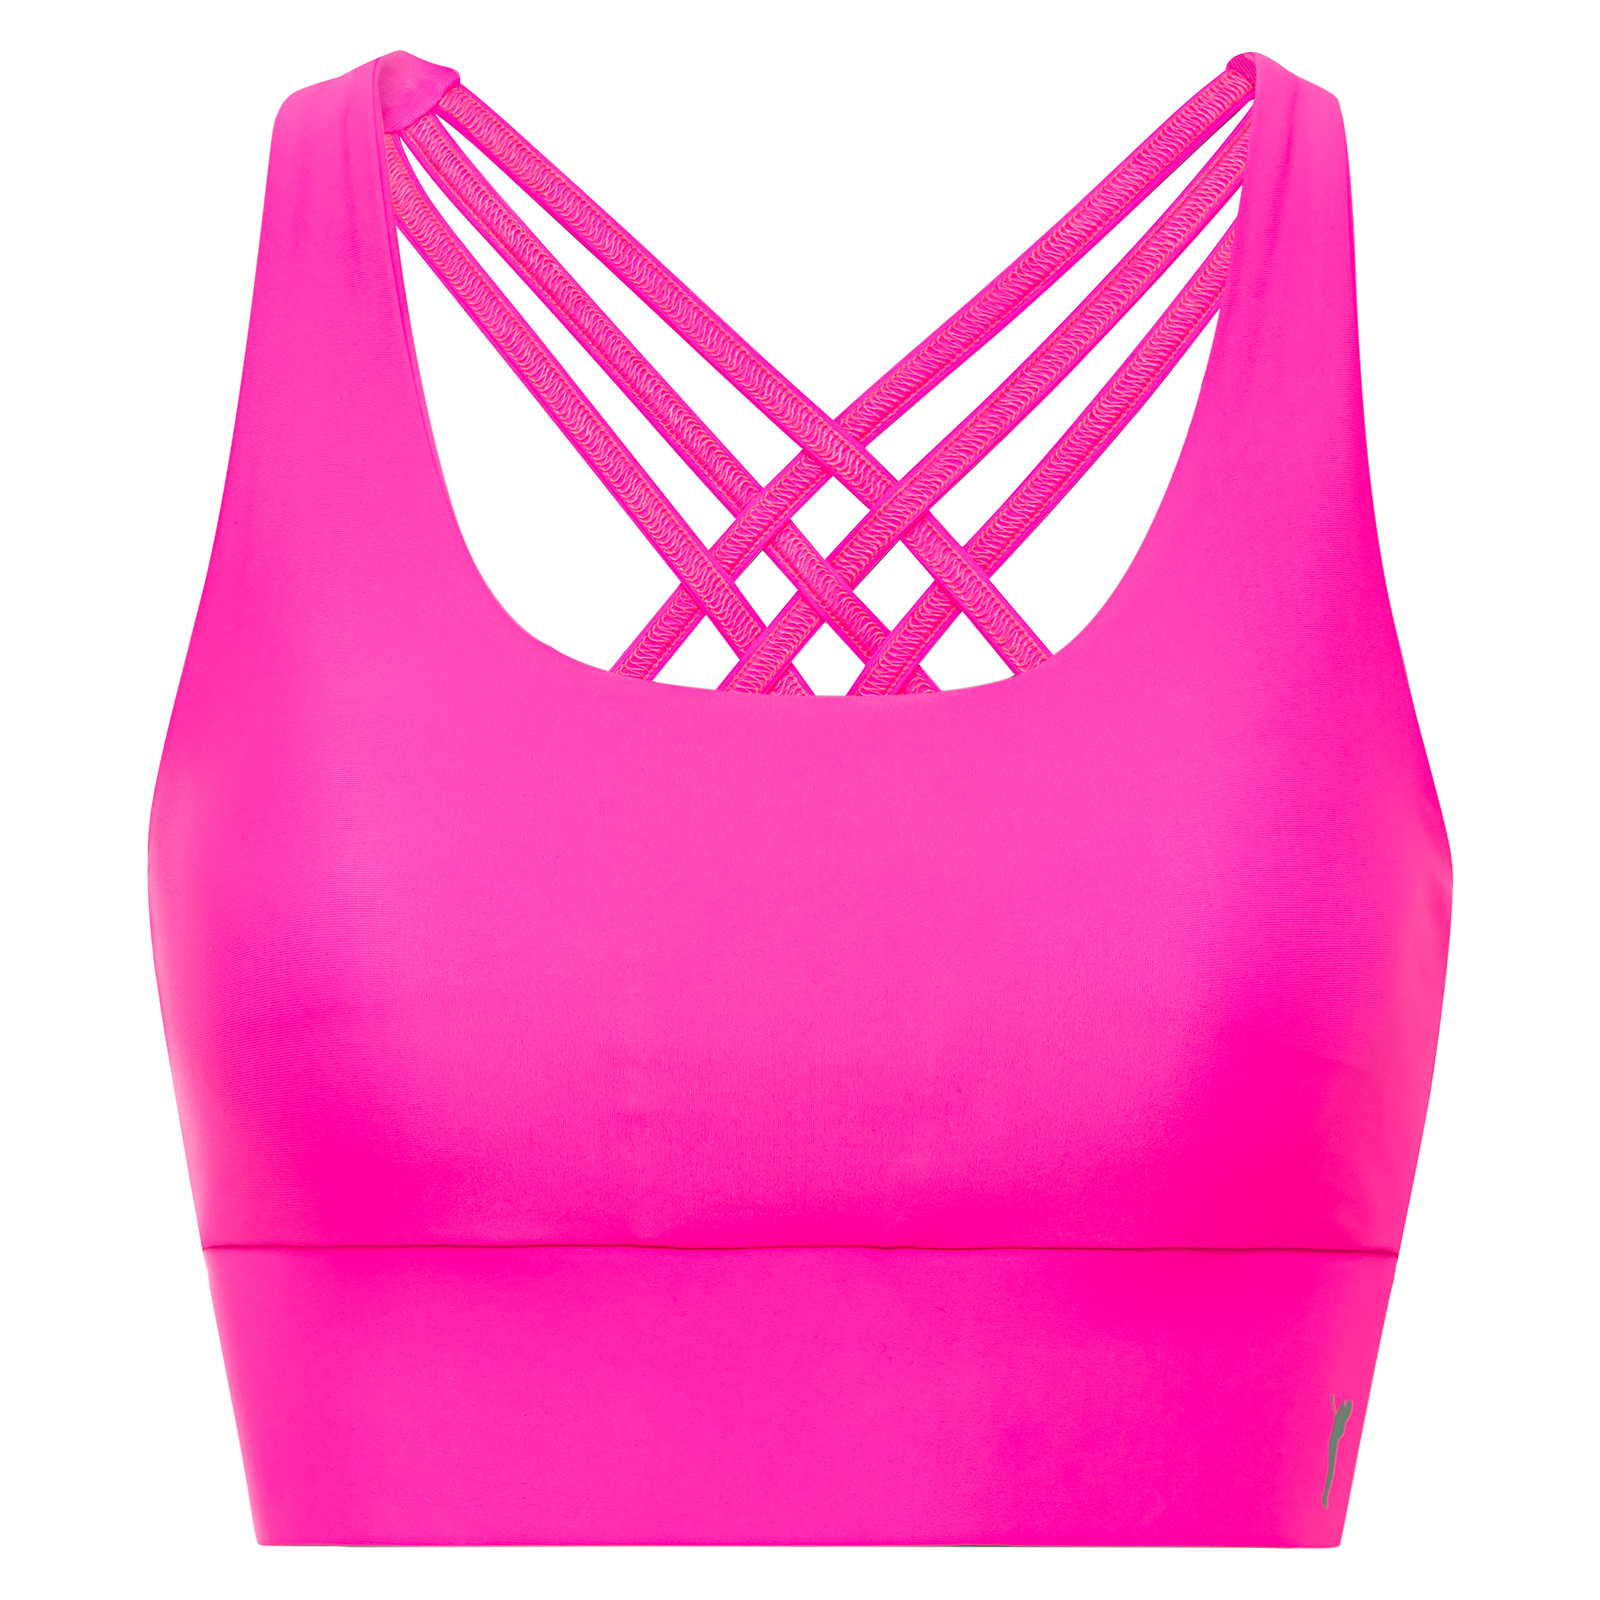 Elastic ladies bustier made of sustainable high tech material 